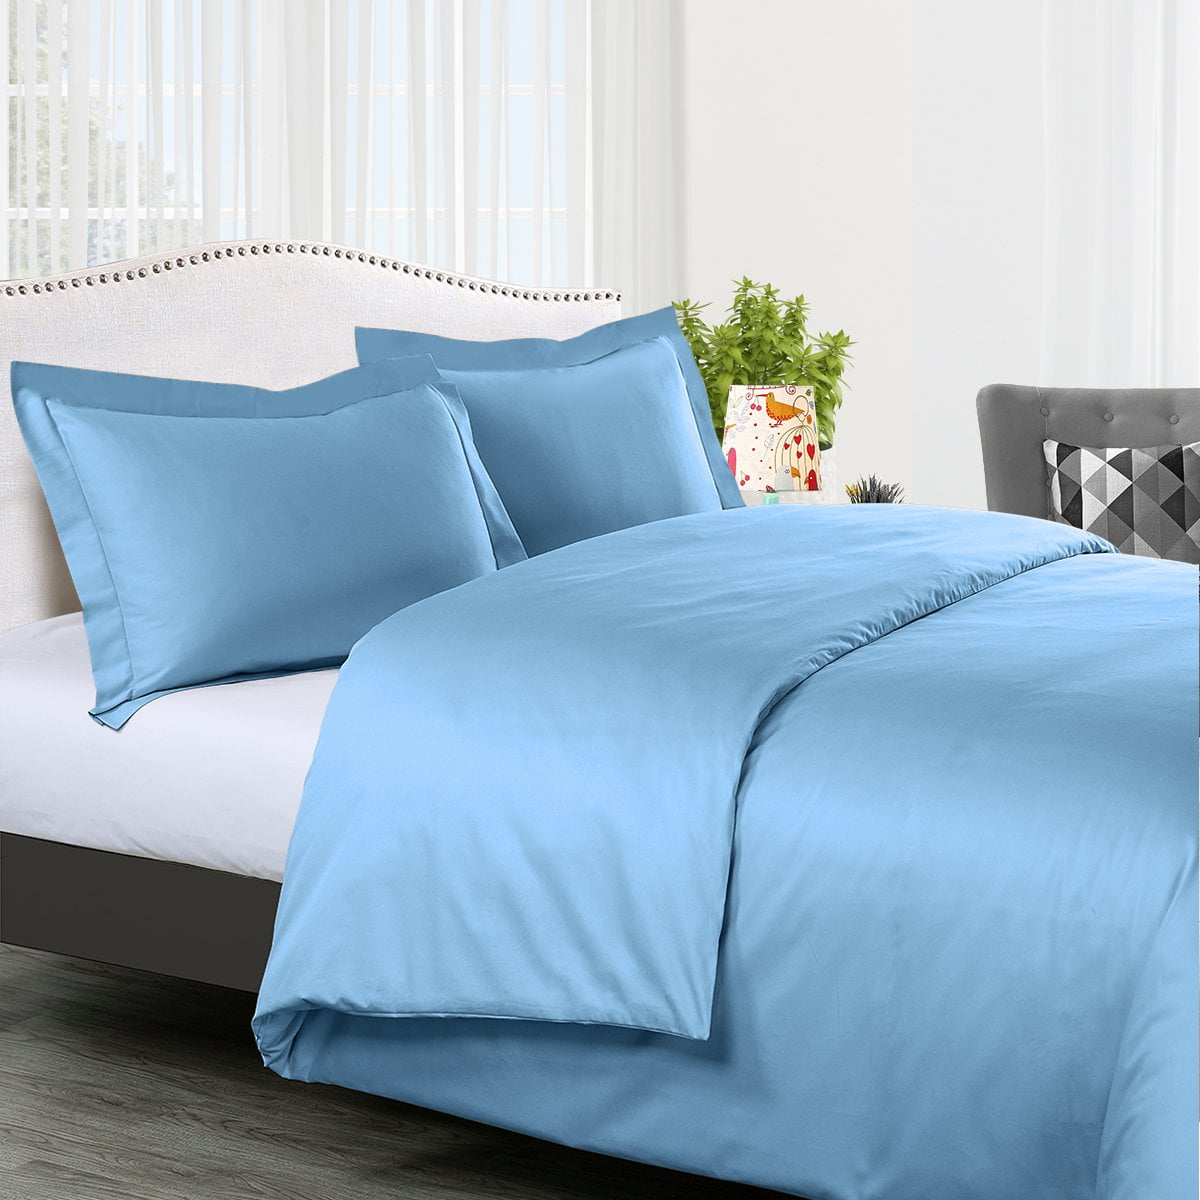 Cotton Solid Ultra Soft Duvet Cover Has, Ultra Soft Duvet Cover